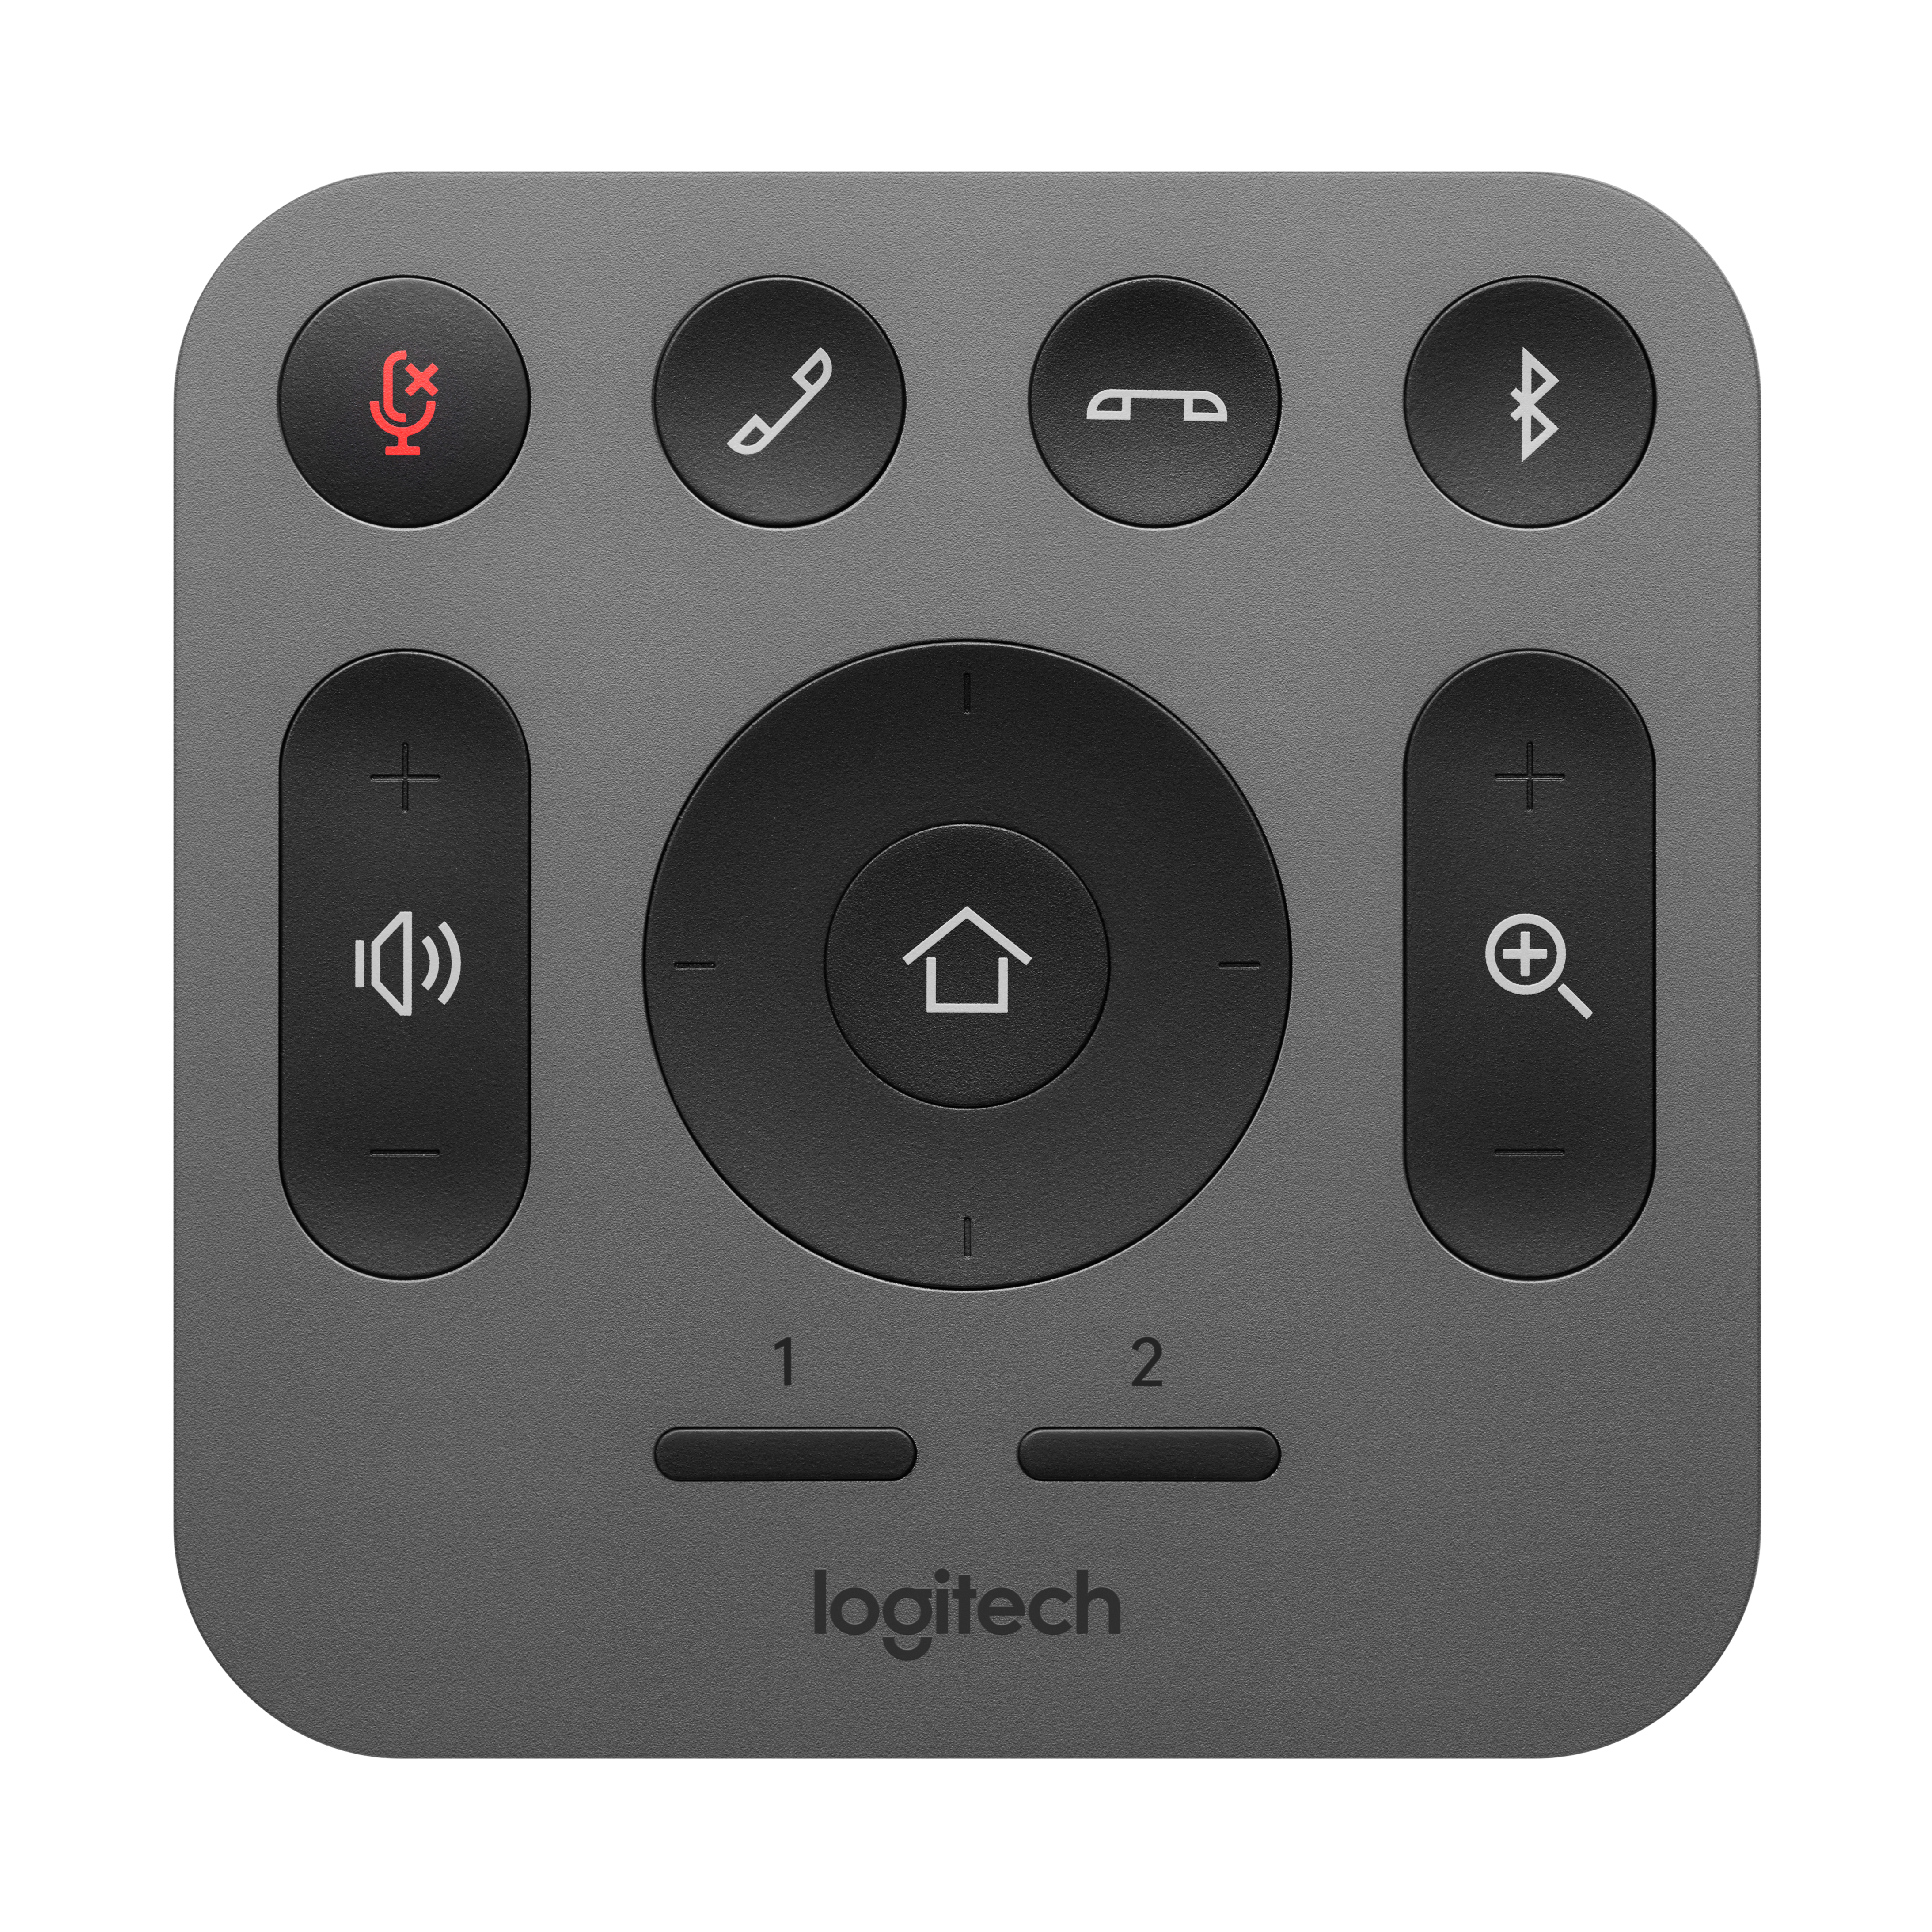 Logitech - Remote control - for P/N: 960-001101, 960-001102